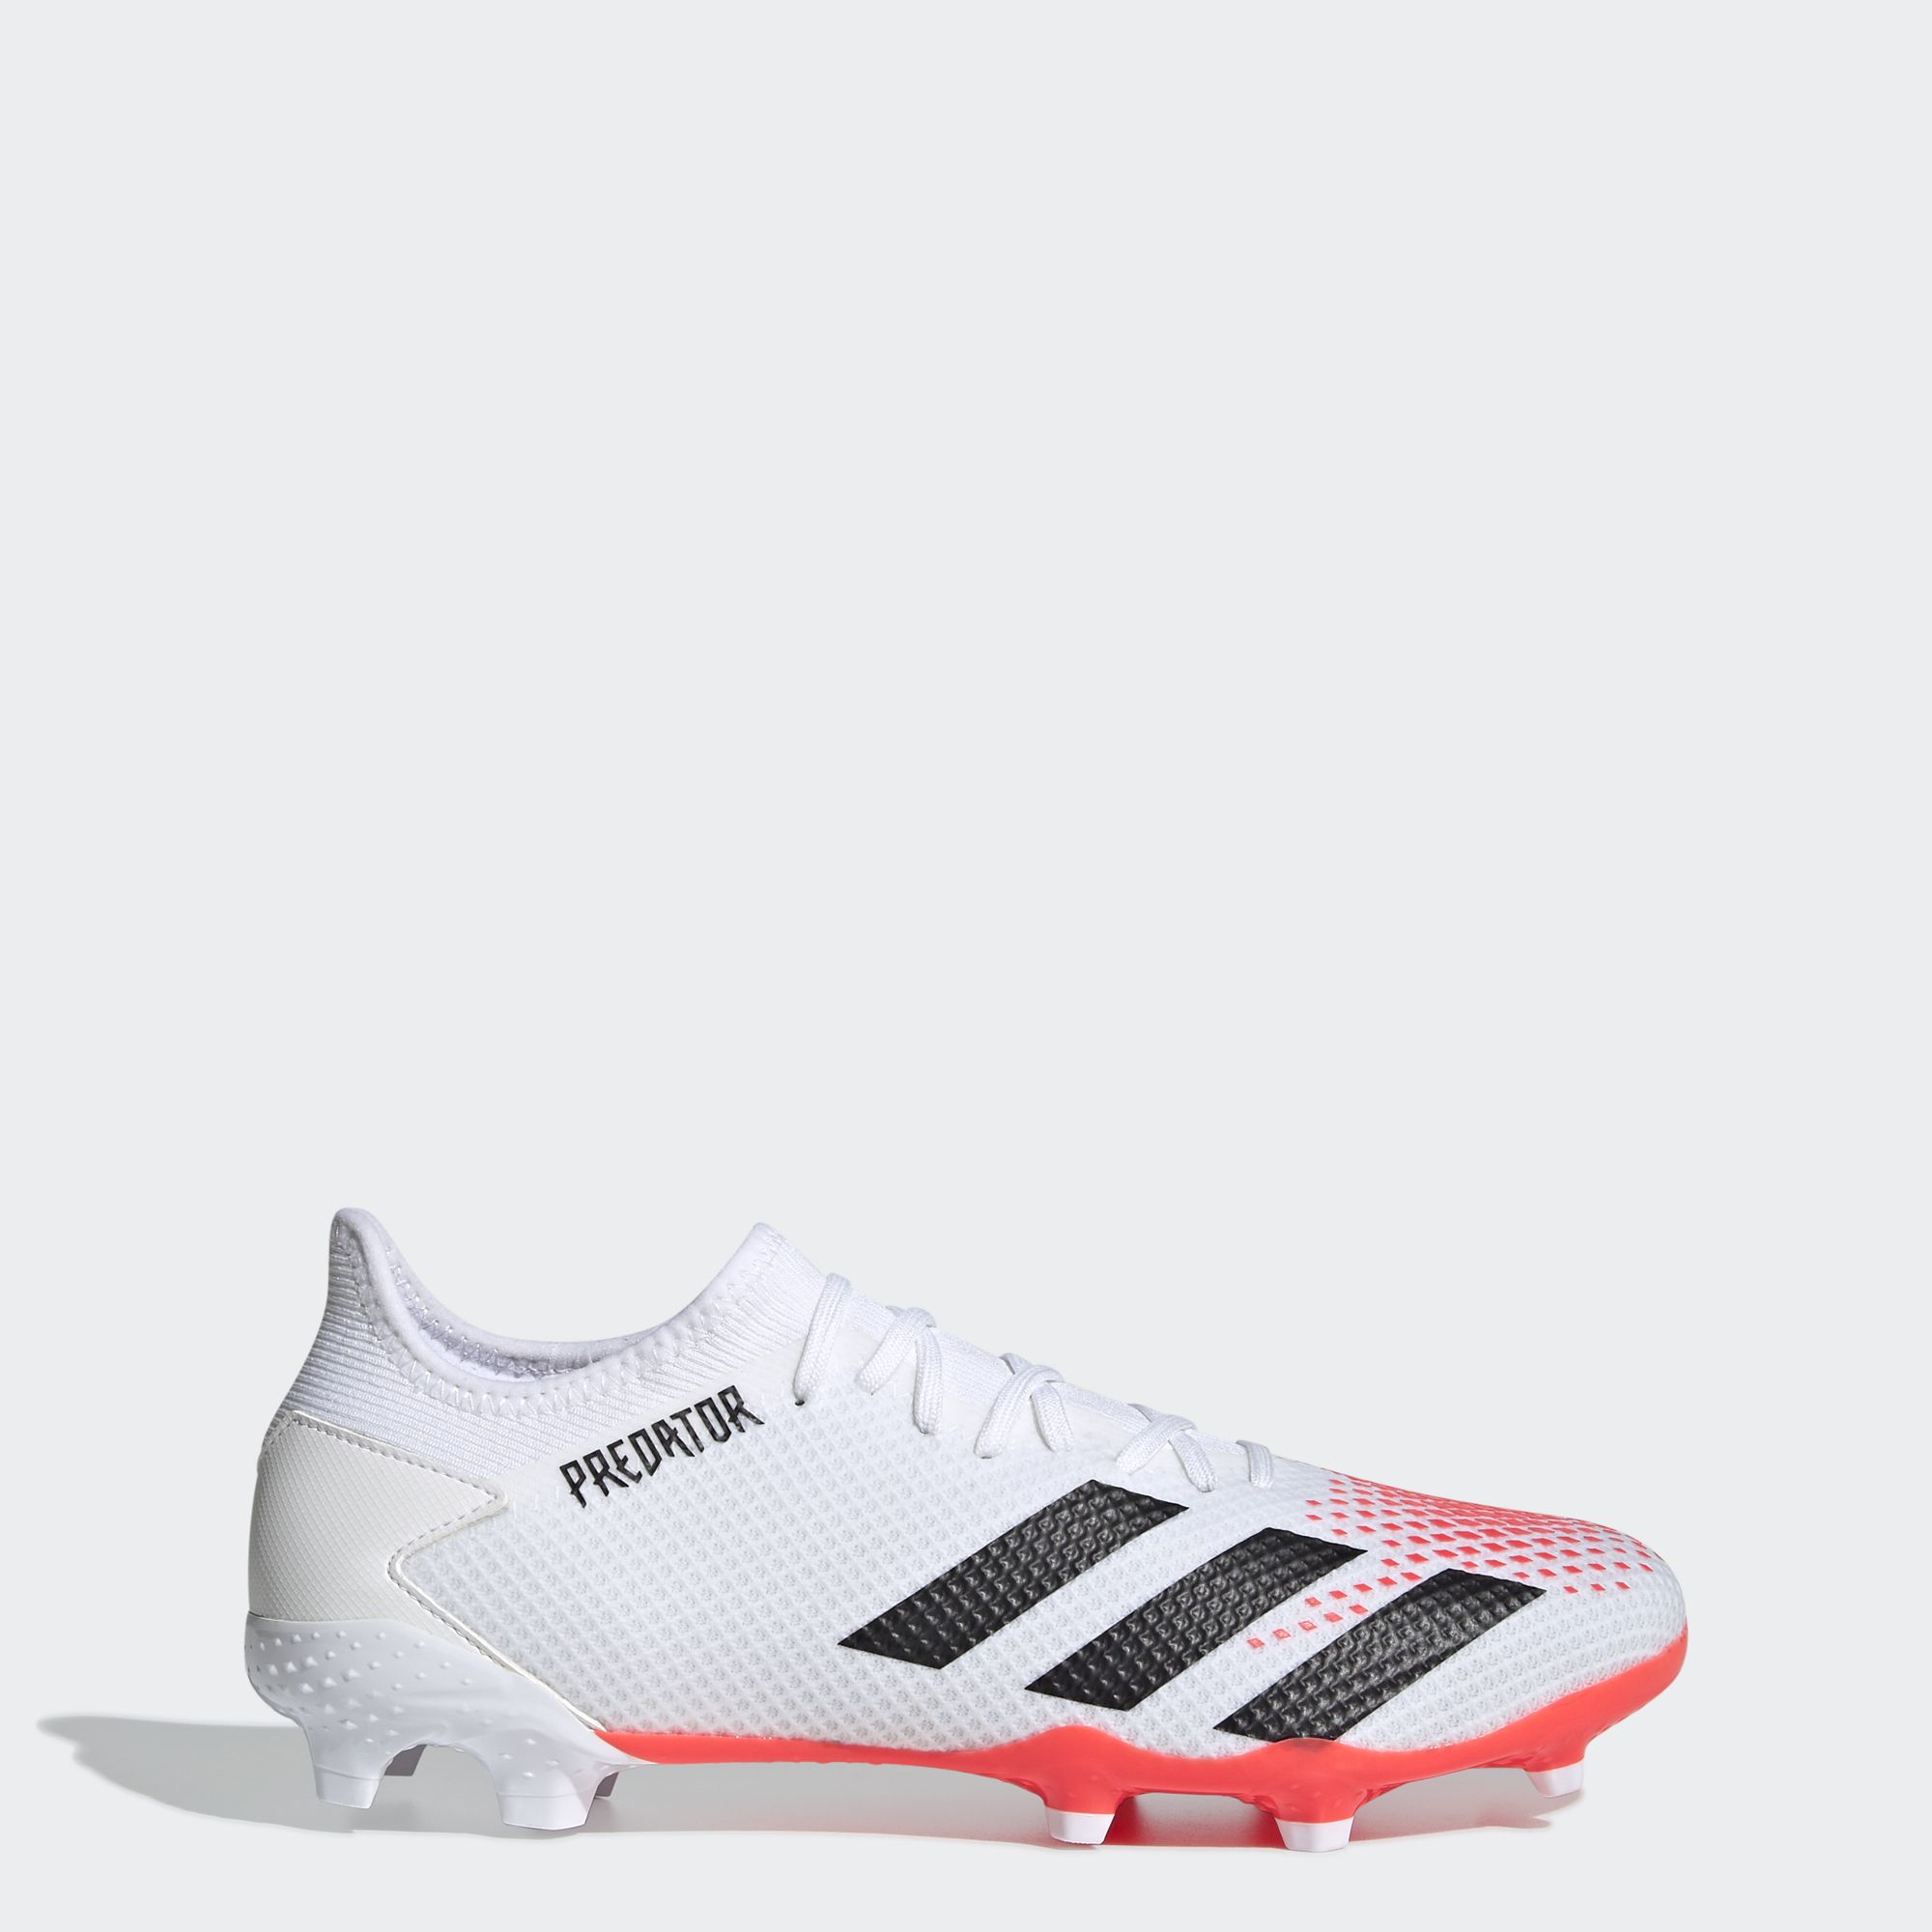 cheapest football shoes online